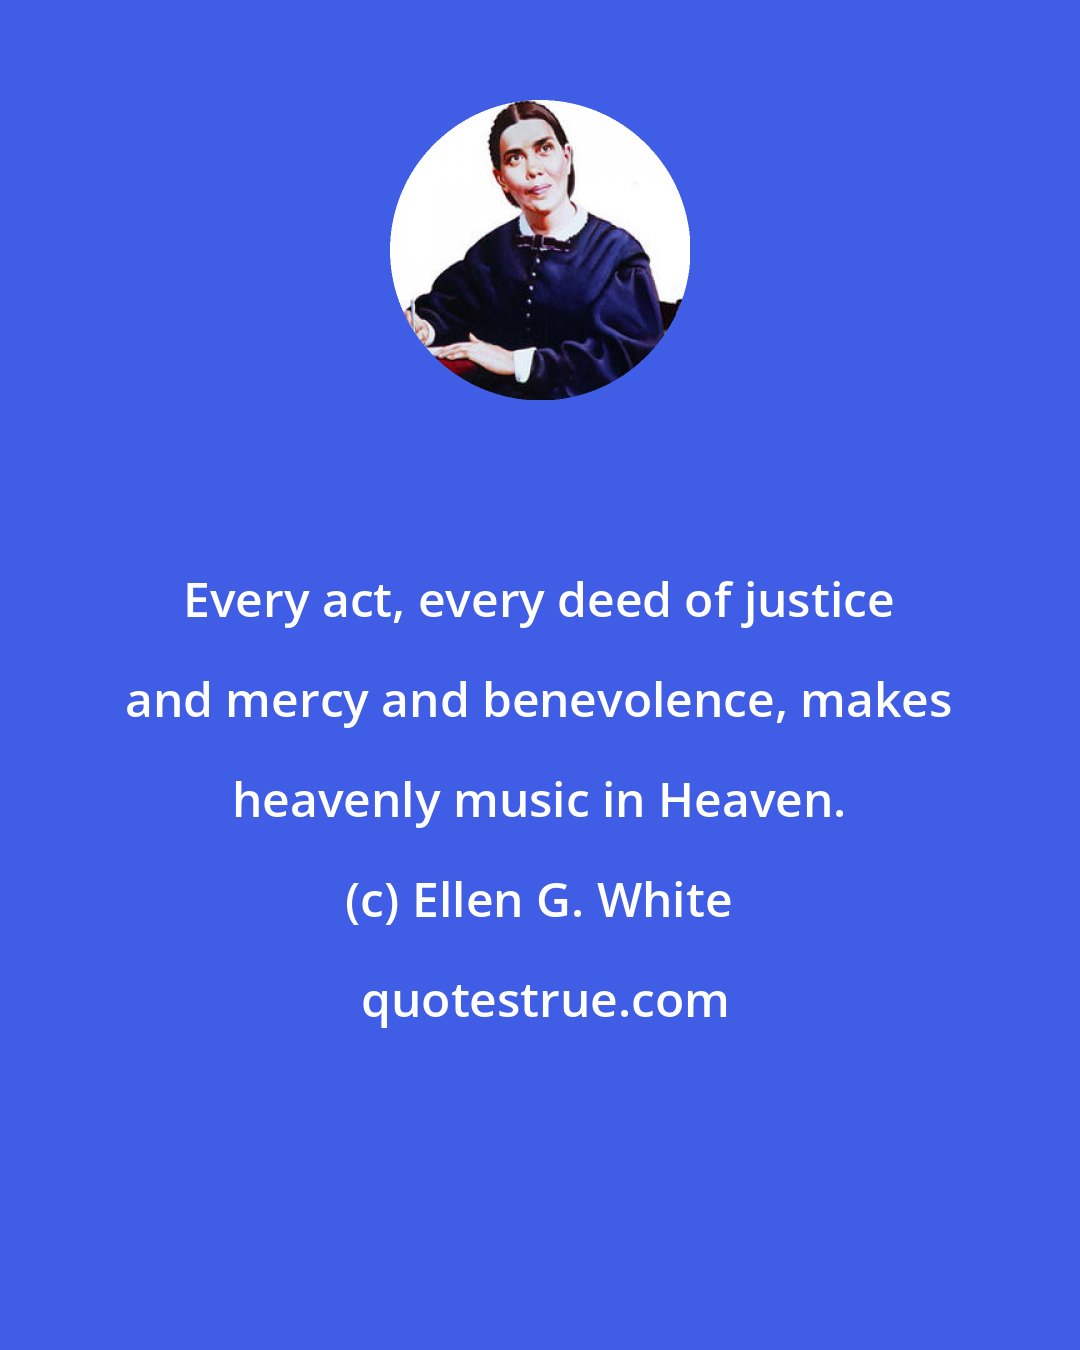 Ellen G. White: Every act, every deed of justice and mercy and benevolence, makes heavenly music in Heaven.